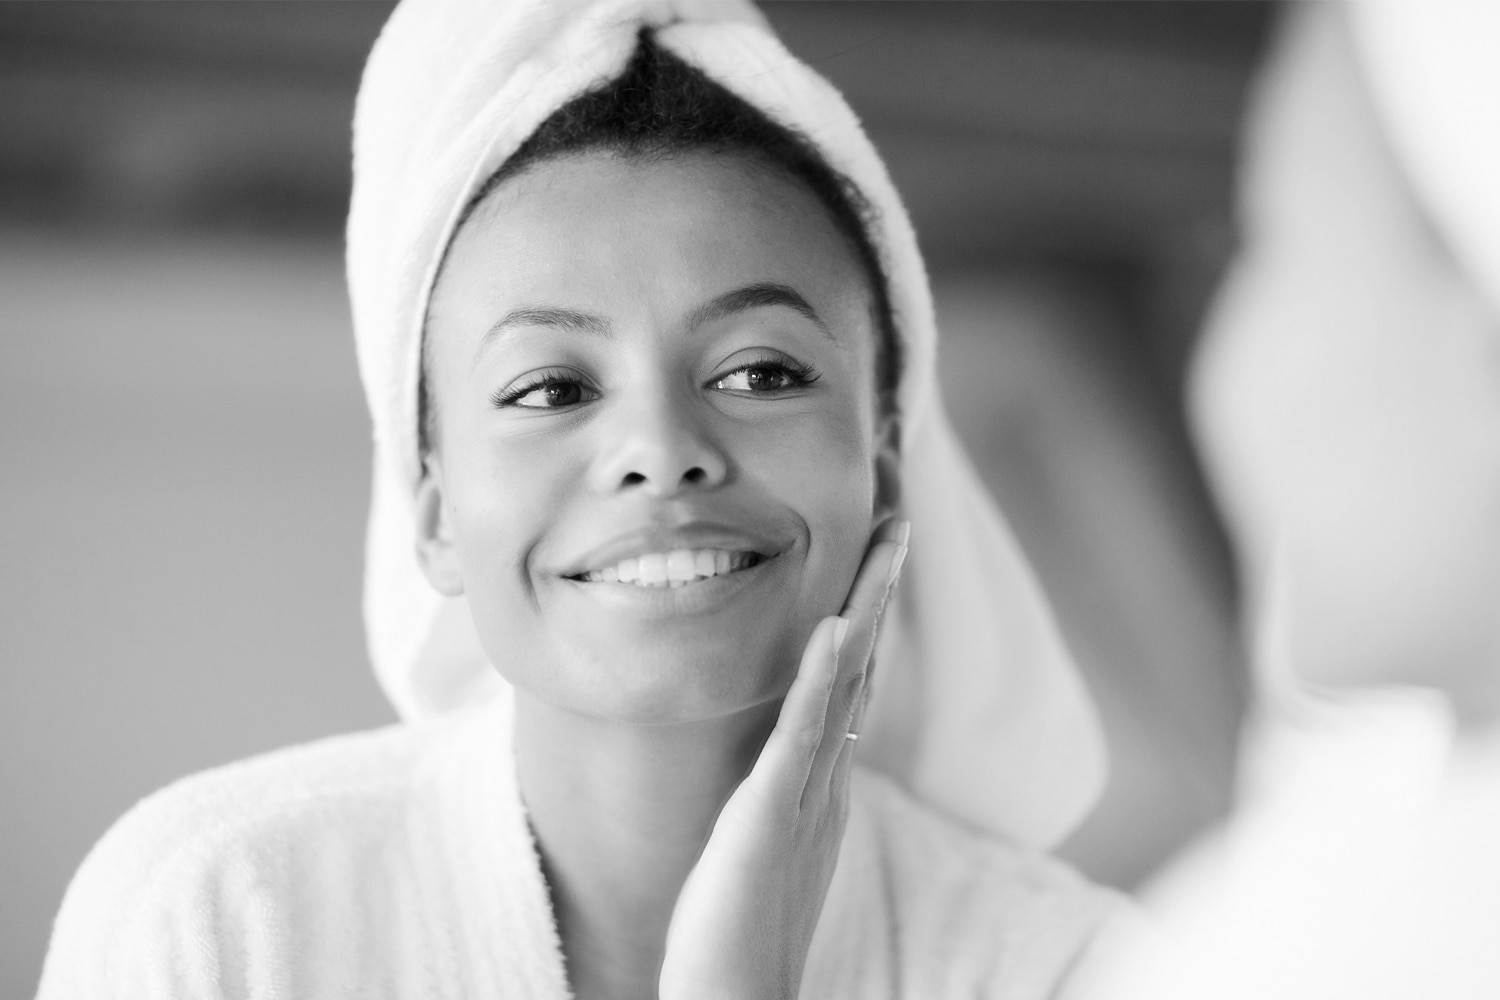 A Woman Looking In The Mirror, Smiling, With A Towel On Her Head And Her Hand On Her Face